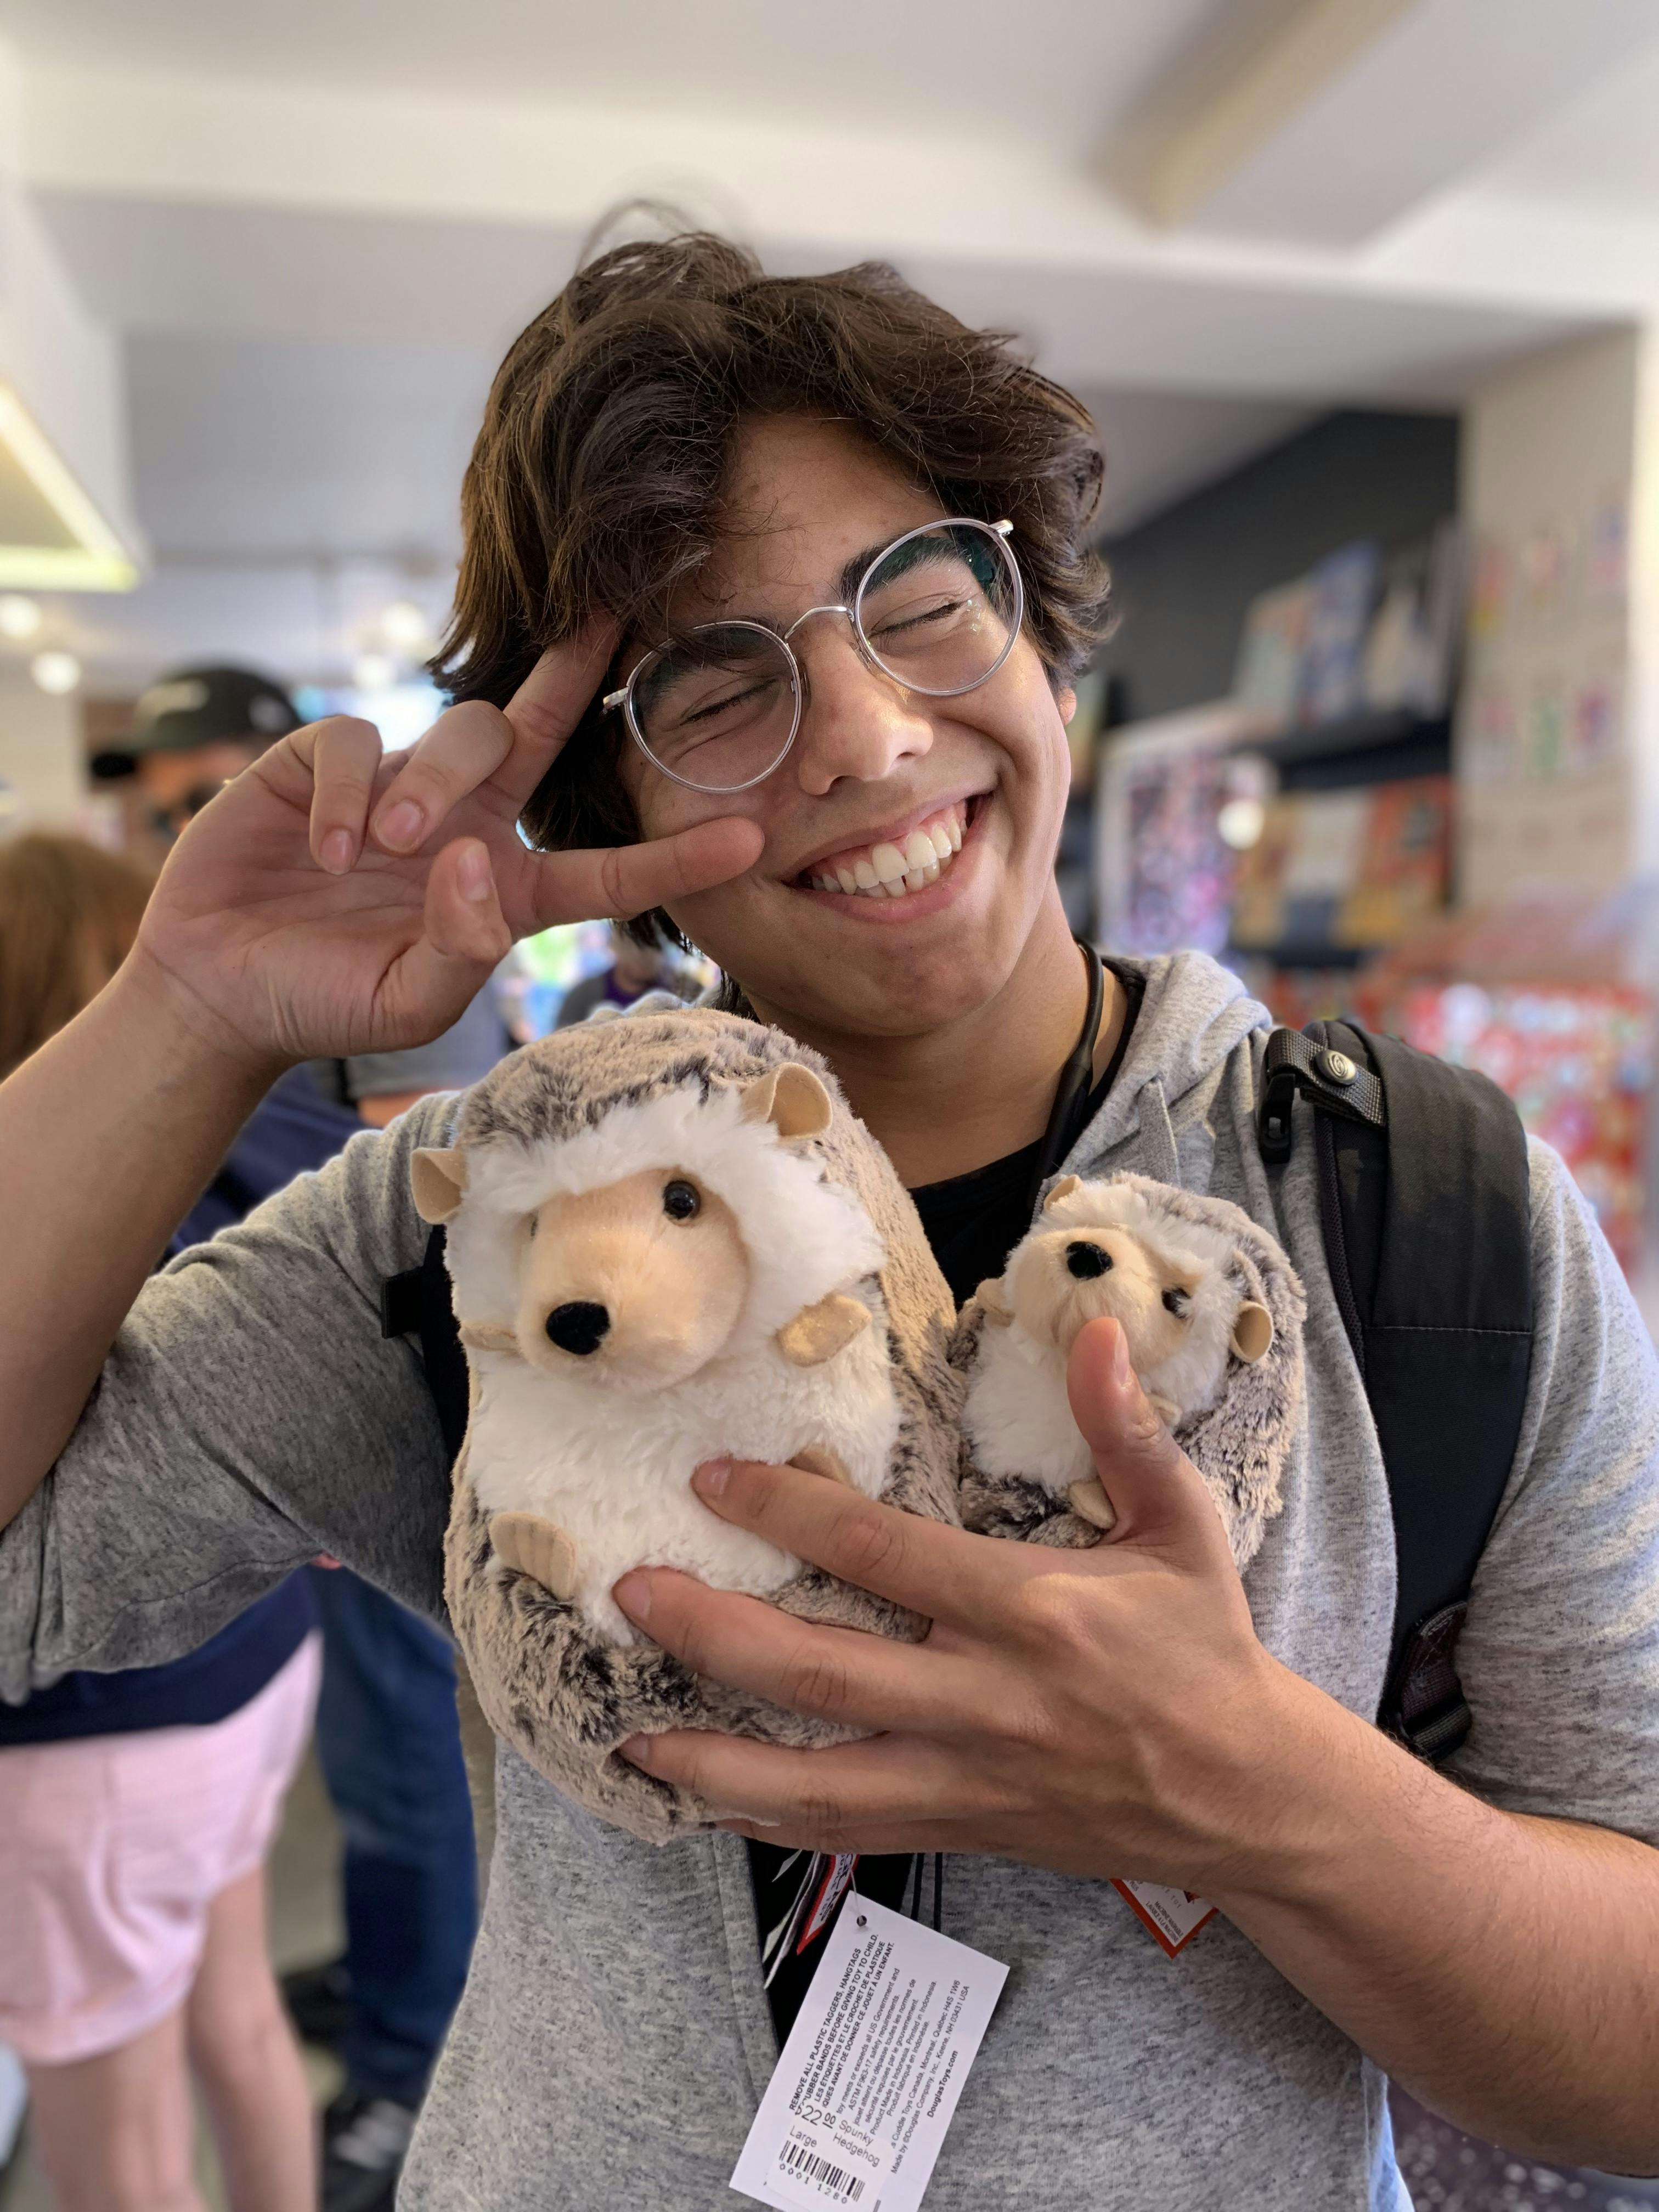 Photograph of Ziyad Edher in a stuffed animal store. He is holding a stuffed hedgehog plushie.